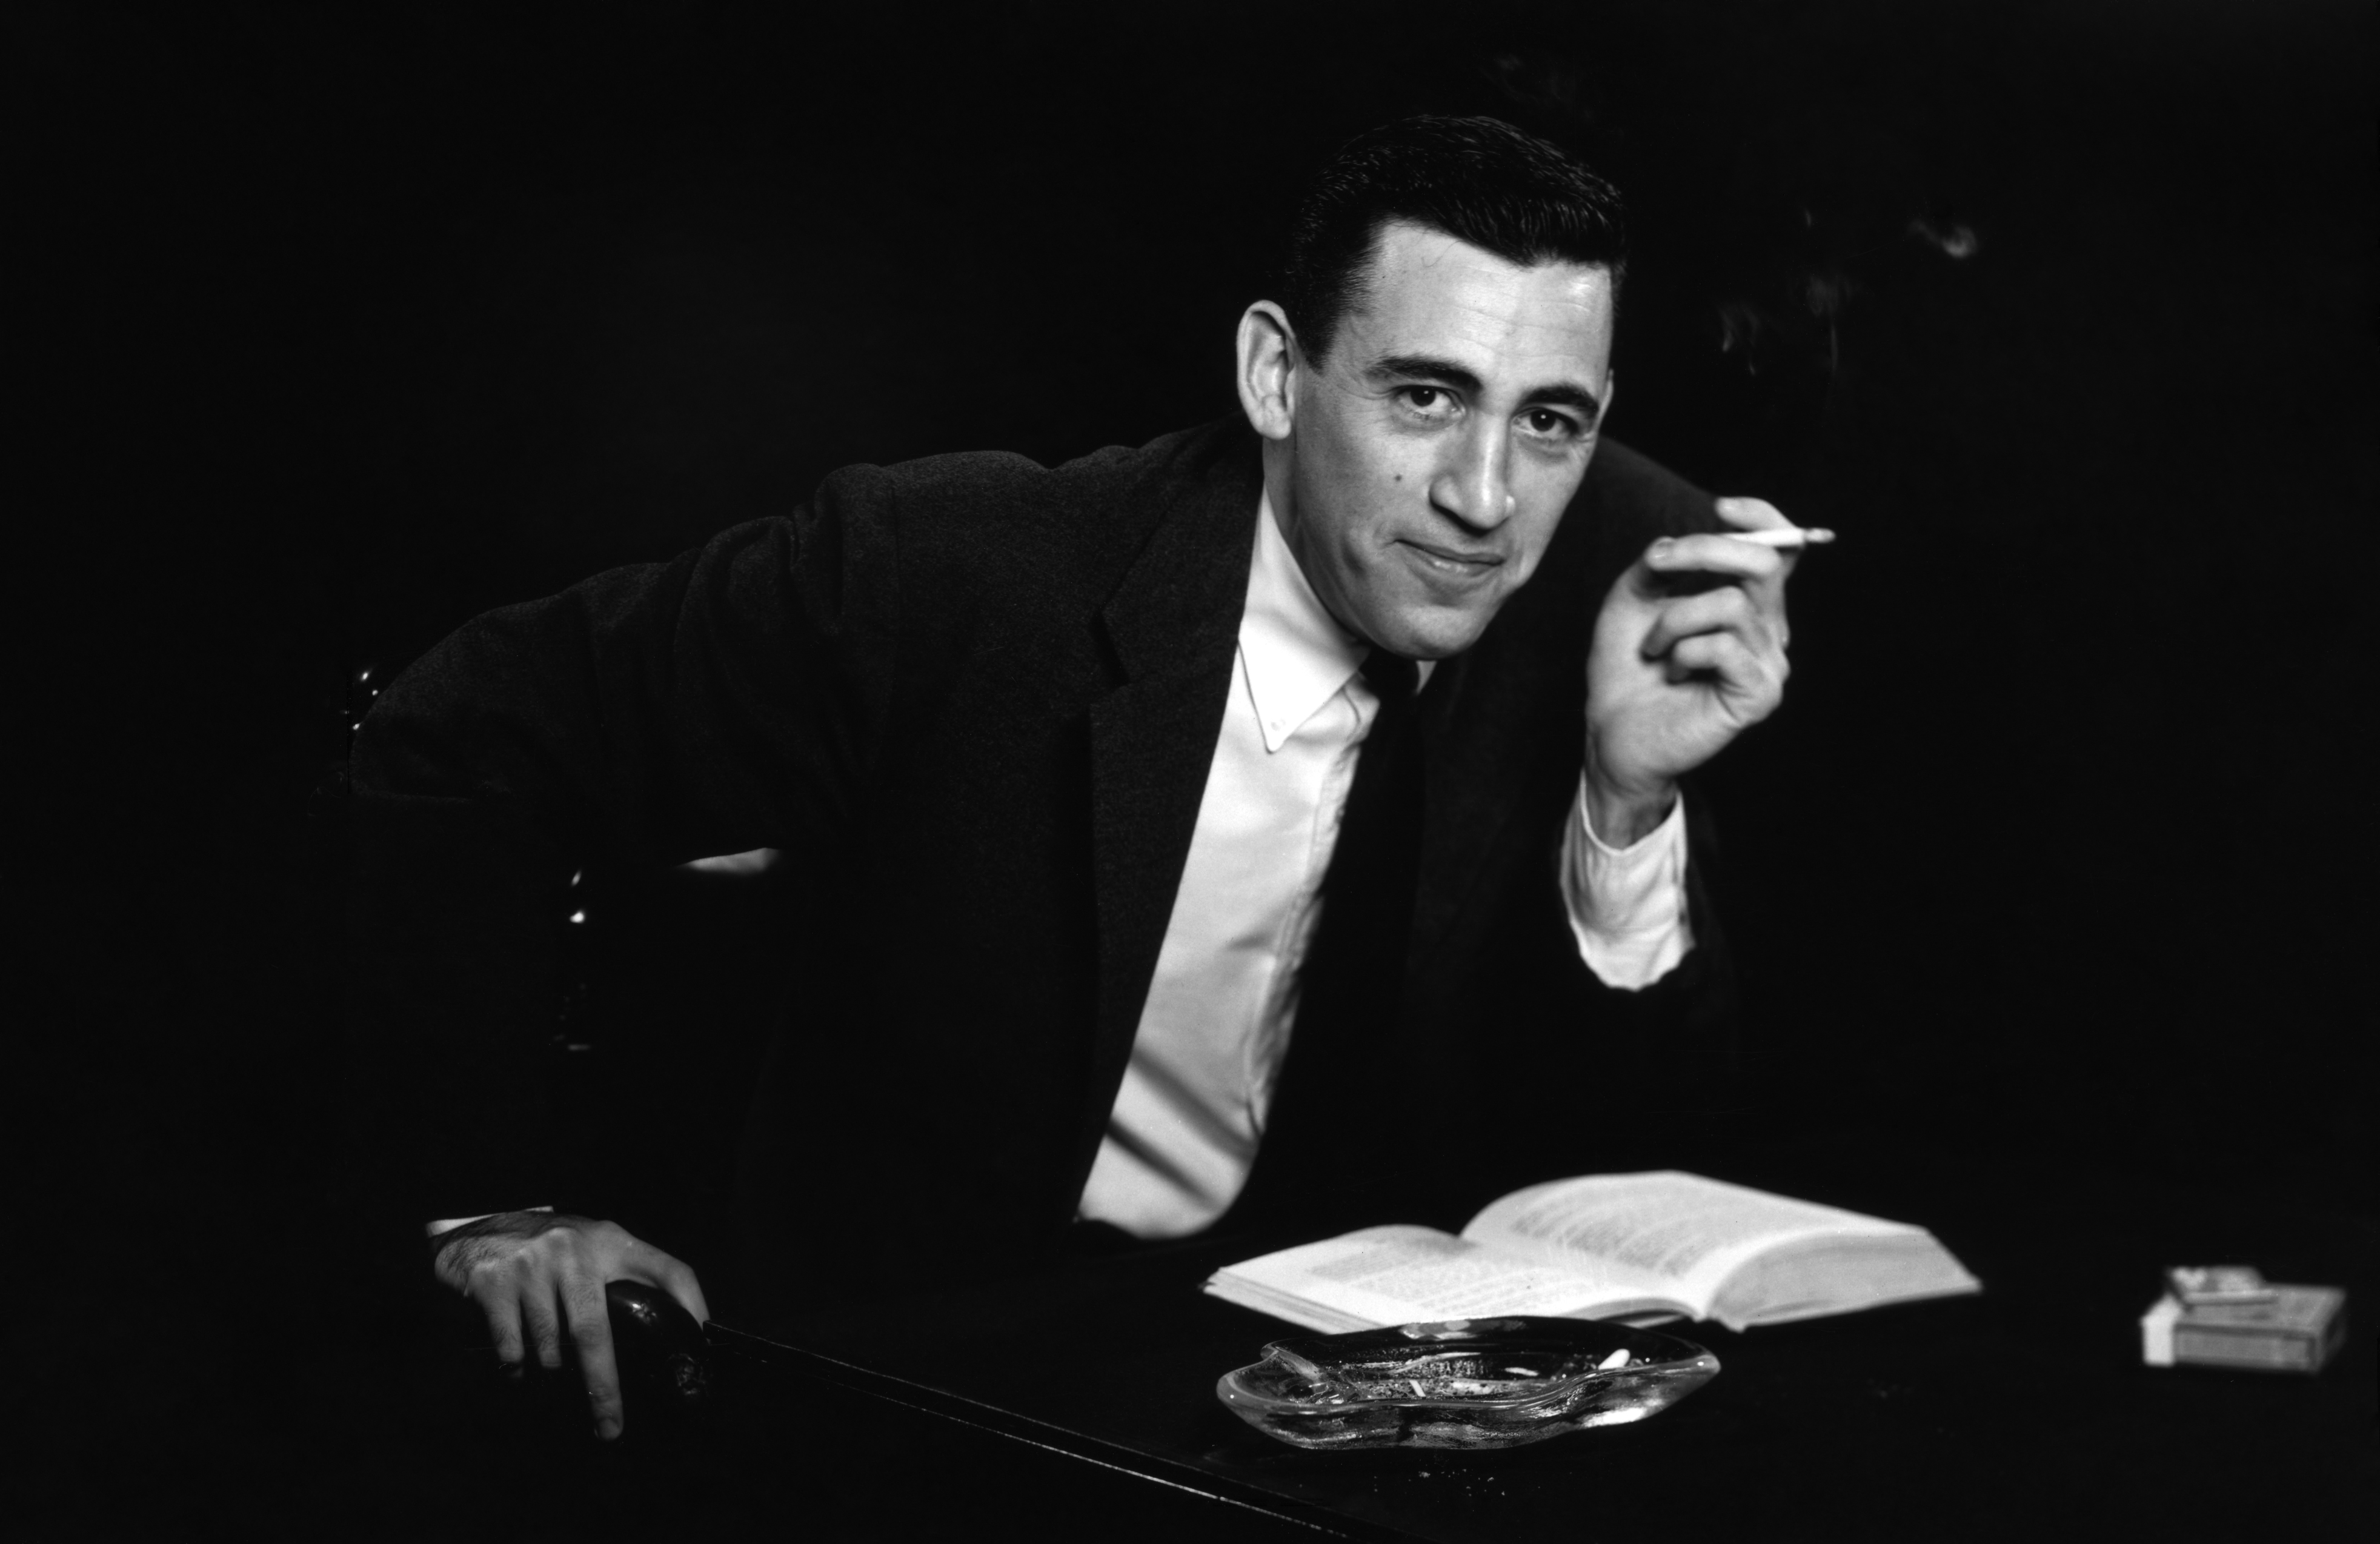 NEW YORK - NOVEMBER 20, 1952: *** EXCLUSIVE - CALL FOR IMAGE *** JD Salinger poses for a portrait as he reads from his classic American novel "The Catcher in the Rye" on November 20, 1952 in the Brooklyn borough of New York City. Salinger died on January 27, 2010. (Photo by Antony Di Gesu/San Diego Historical Society/Hulton Archive Collection/Getty Images)